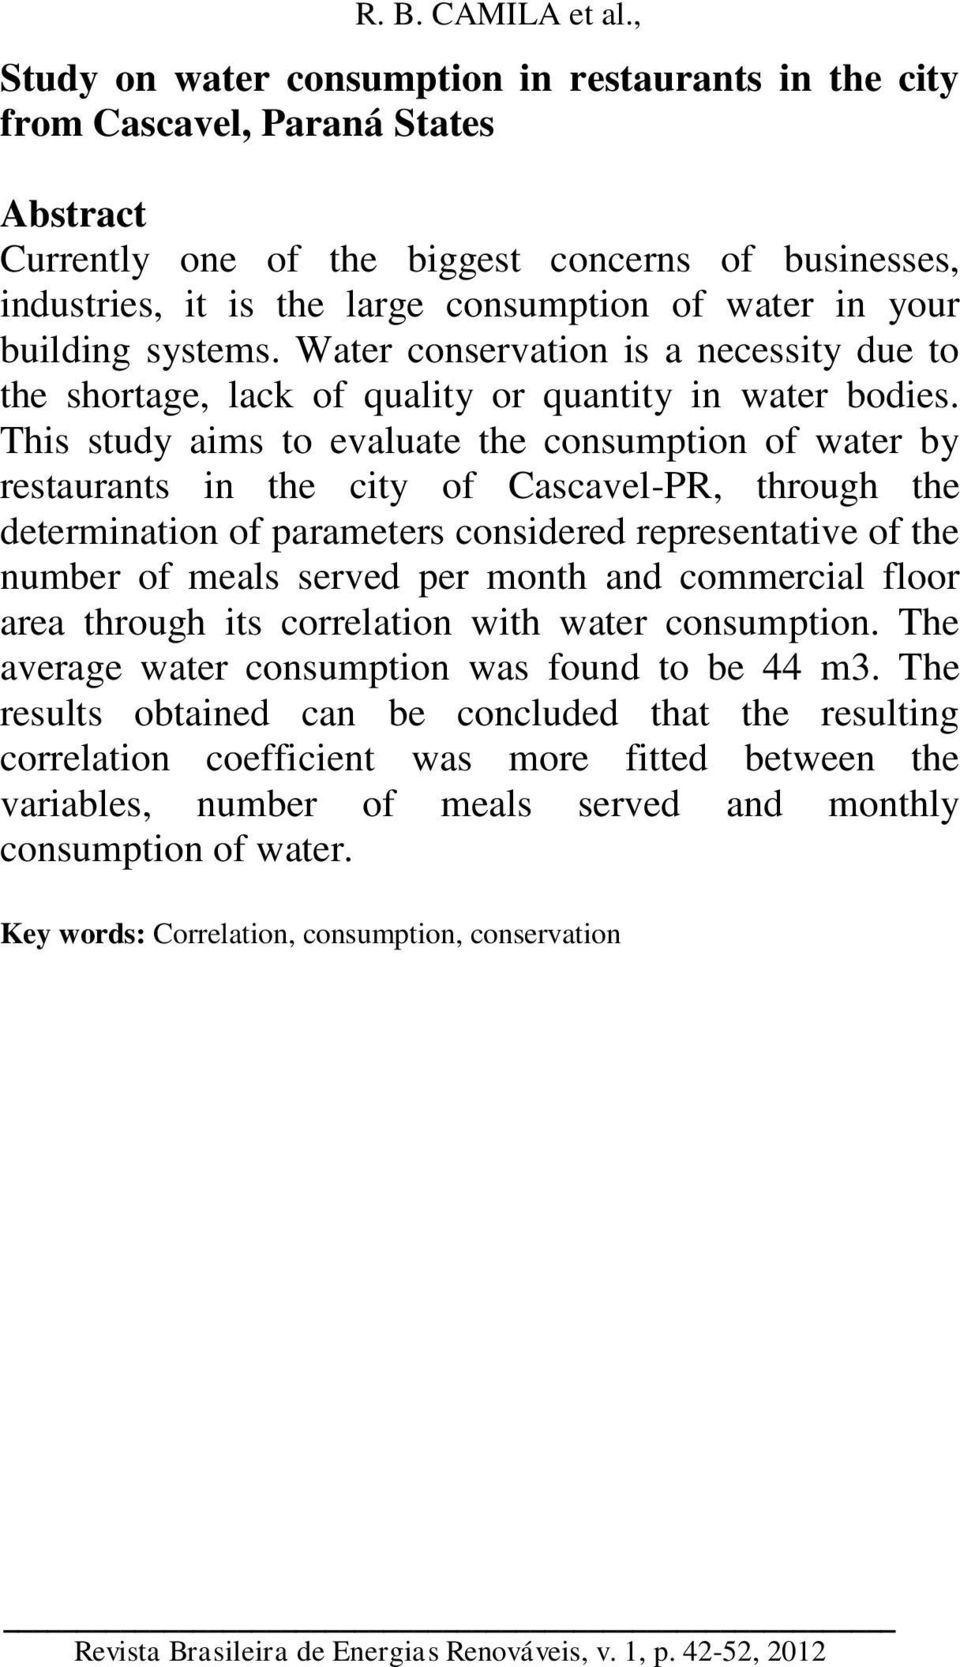 This study aims to evaluate the consumption of water by restaurants in the city of Cascavel-PR, through the determination of parameters considered representative of the number of meals served per